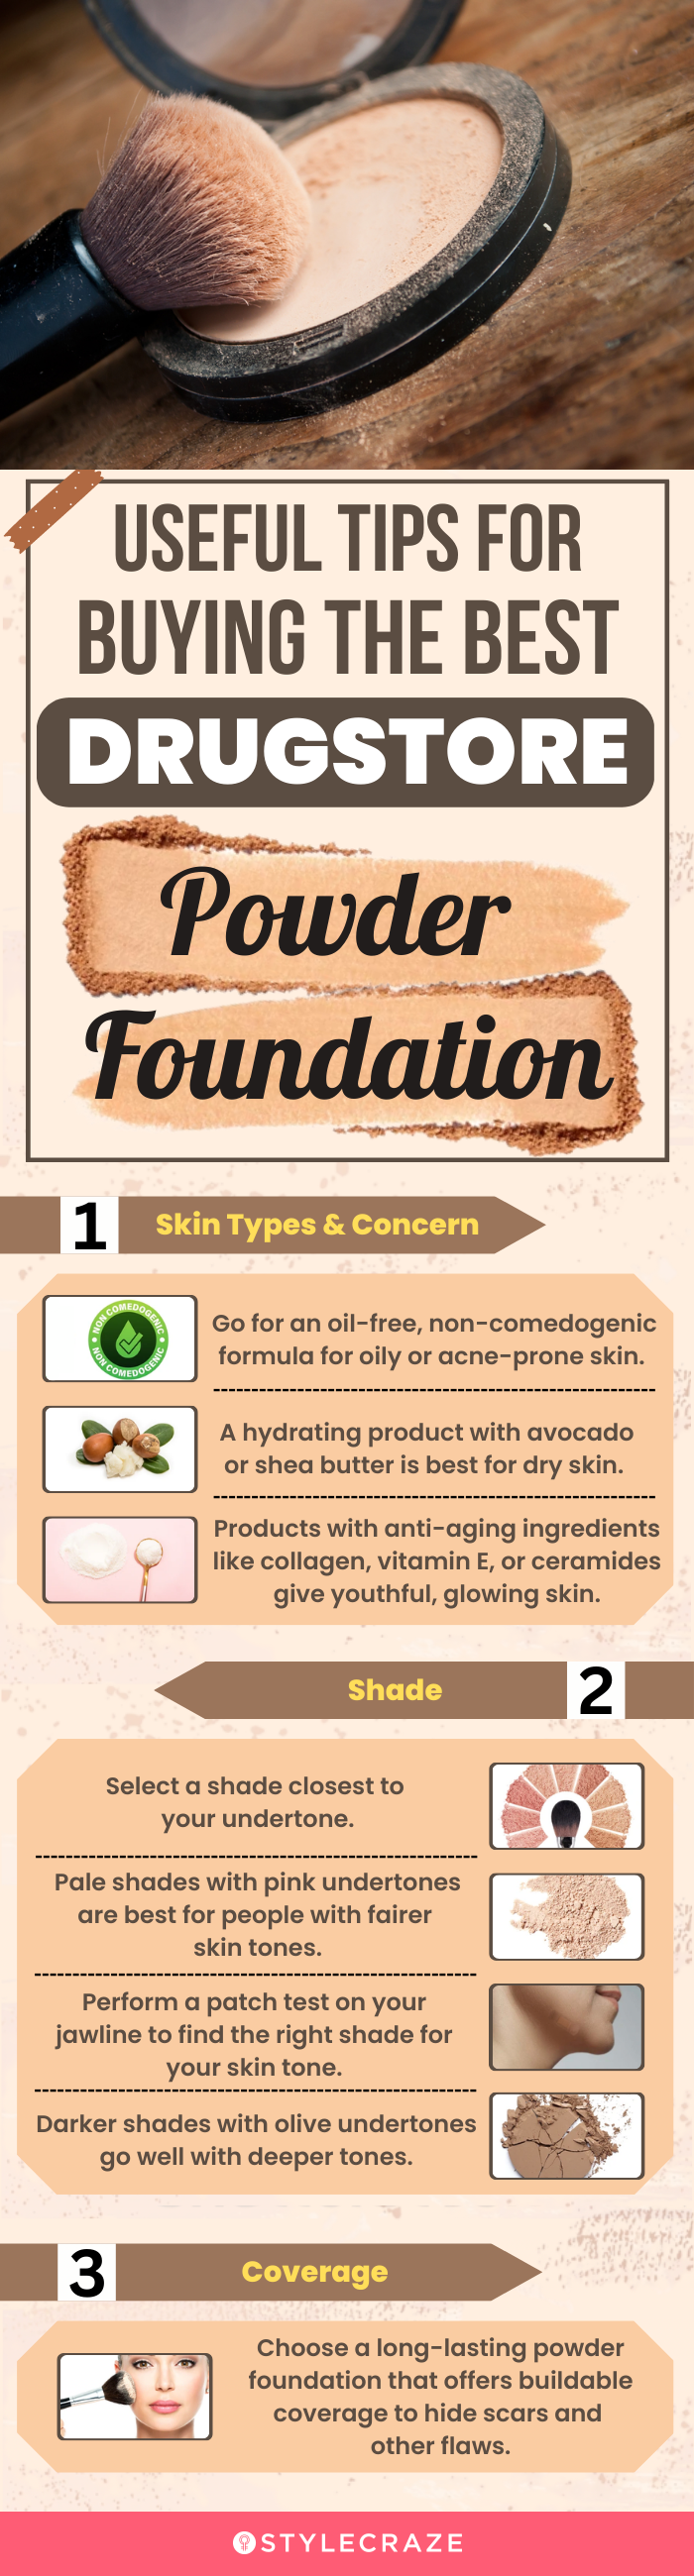 Useful Tips To Buy The Best Drugstore Powder Foundation (infographic)